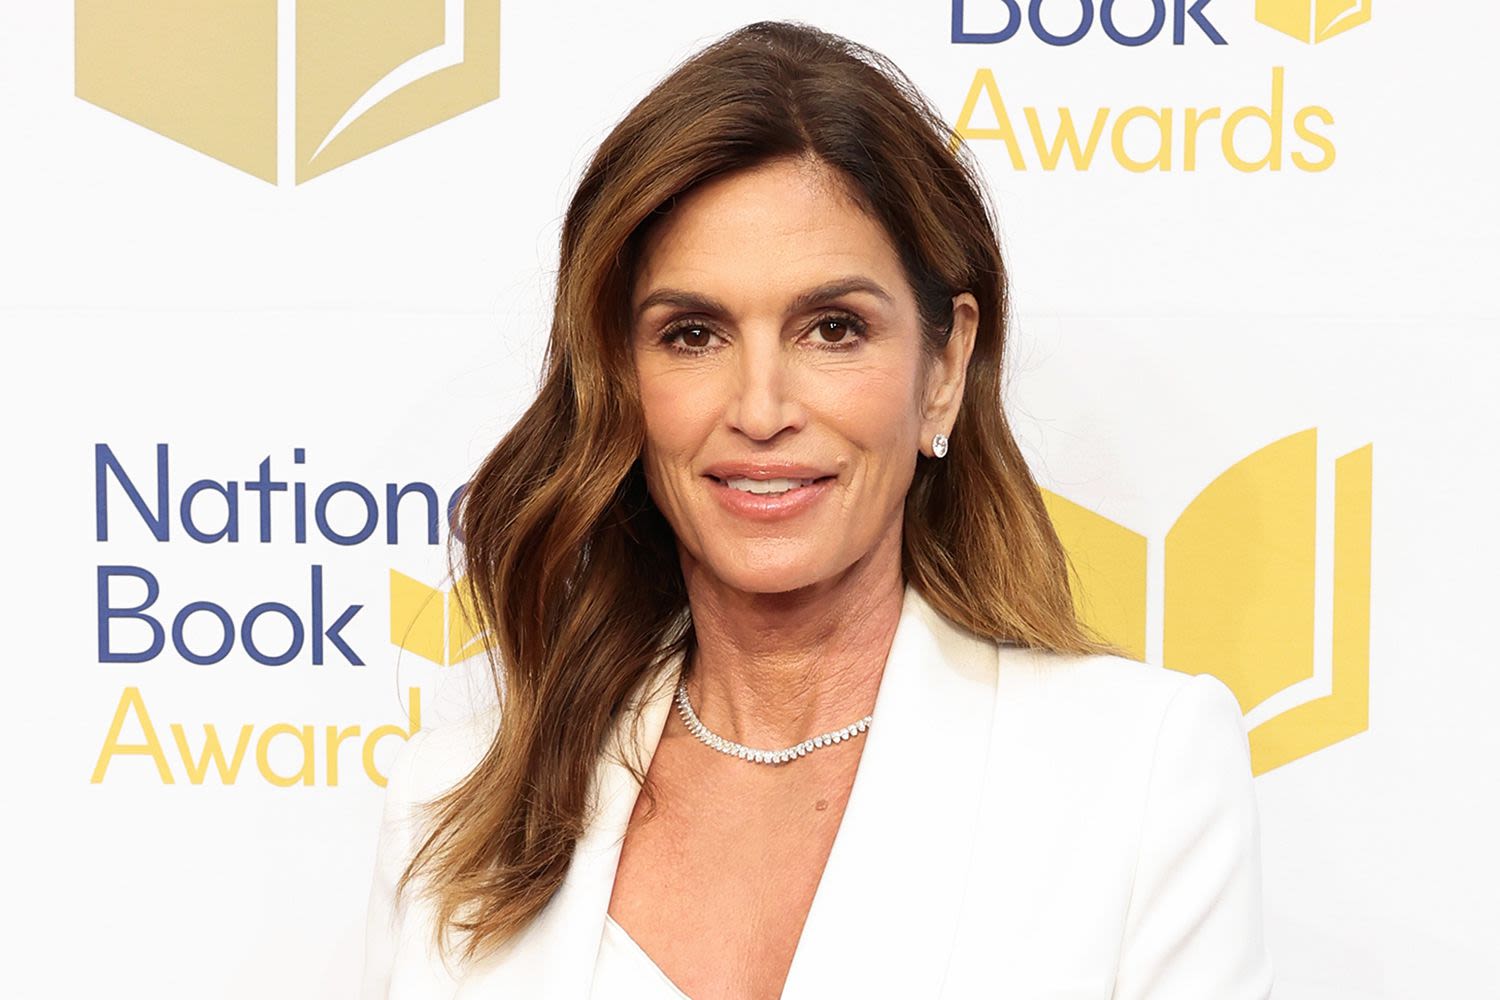 Cindy Crawford Says She Was Making More Money Than Her Parents by the Time She Was 18 Years Old